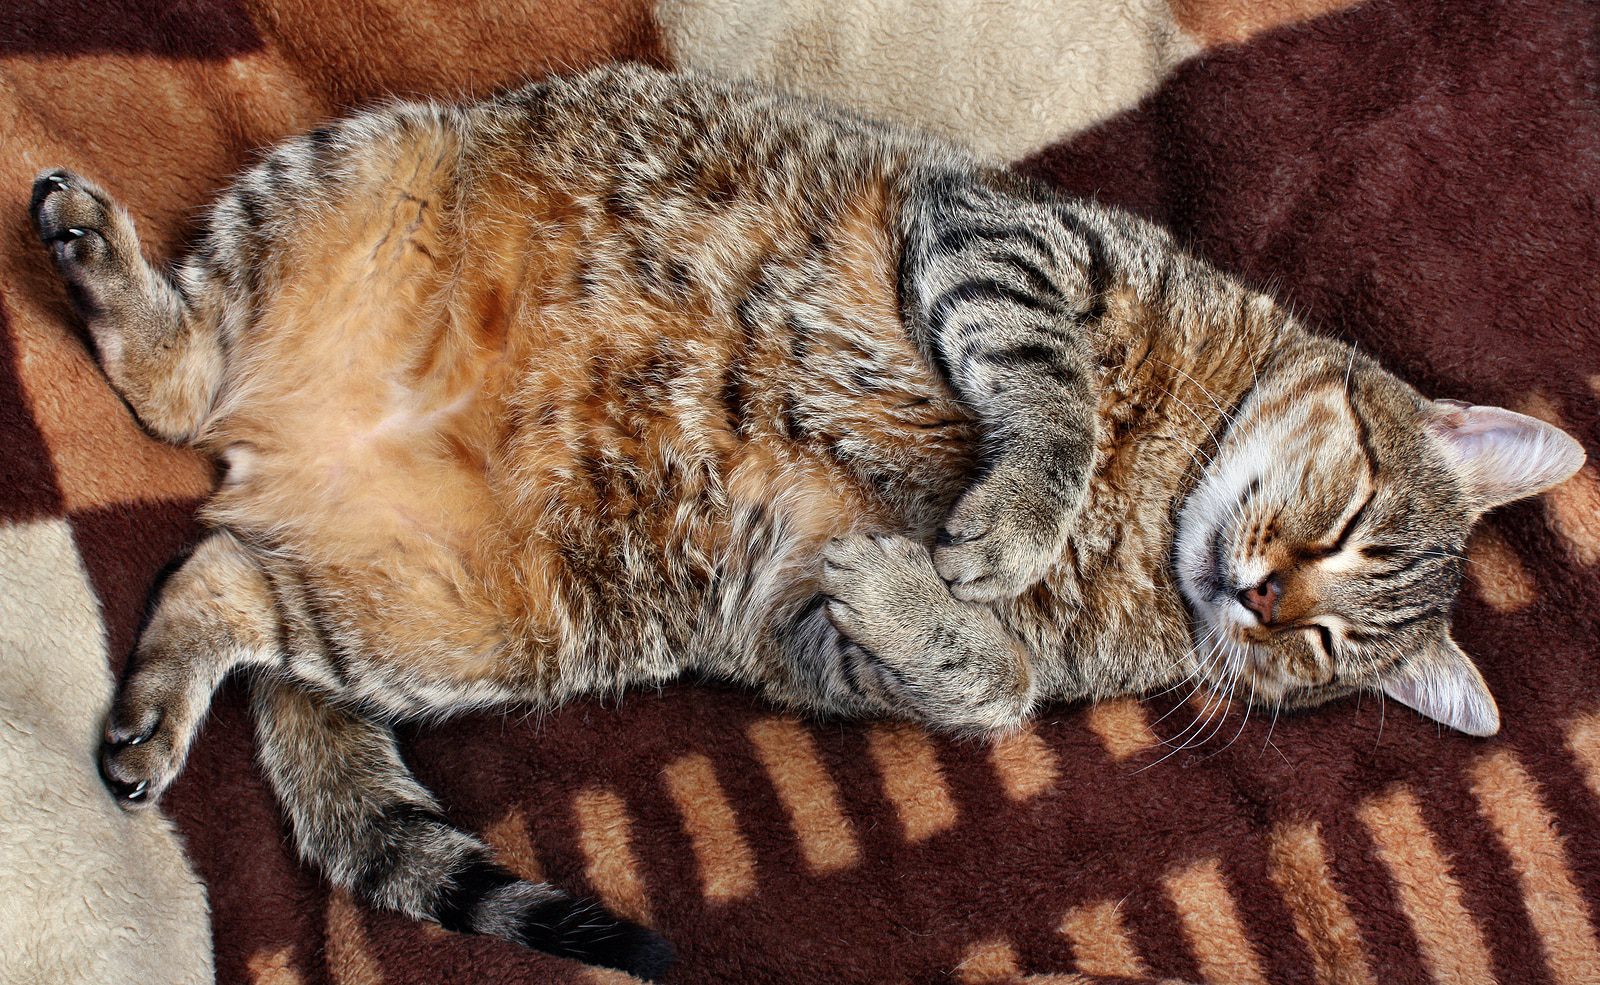 Is your cat overweight? Help her lose weight